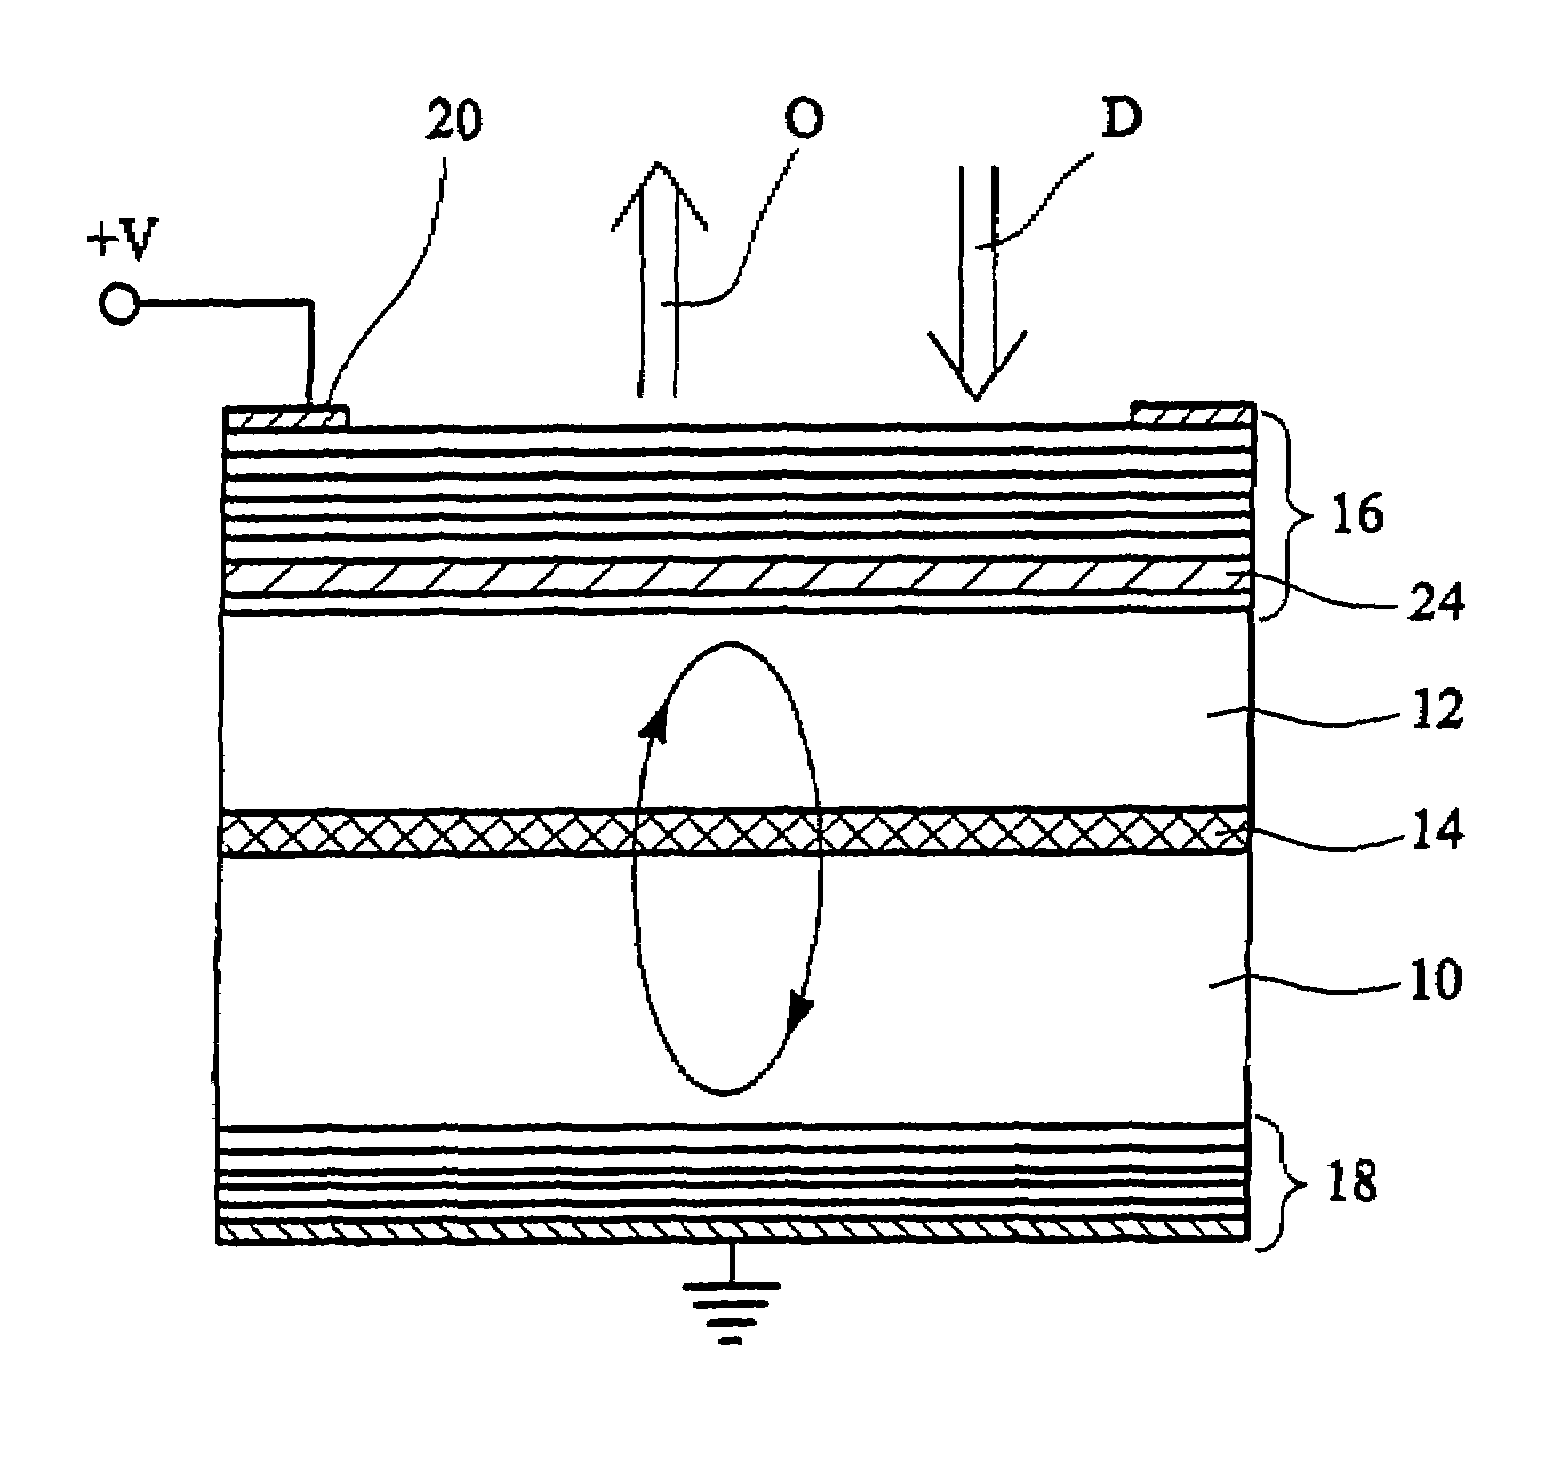 Semiconductor optical devices